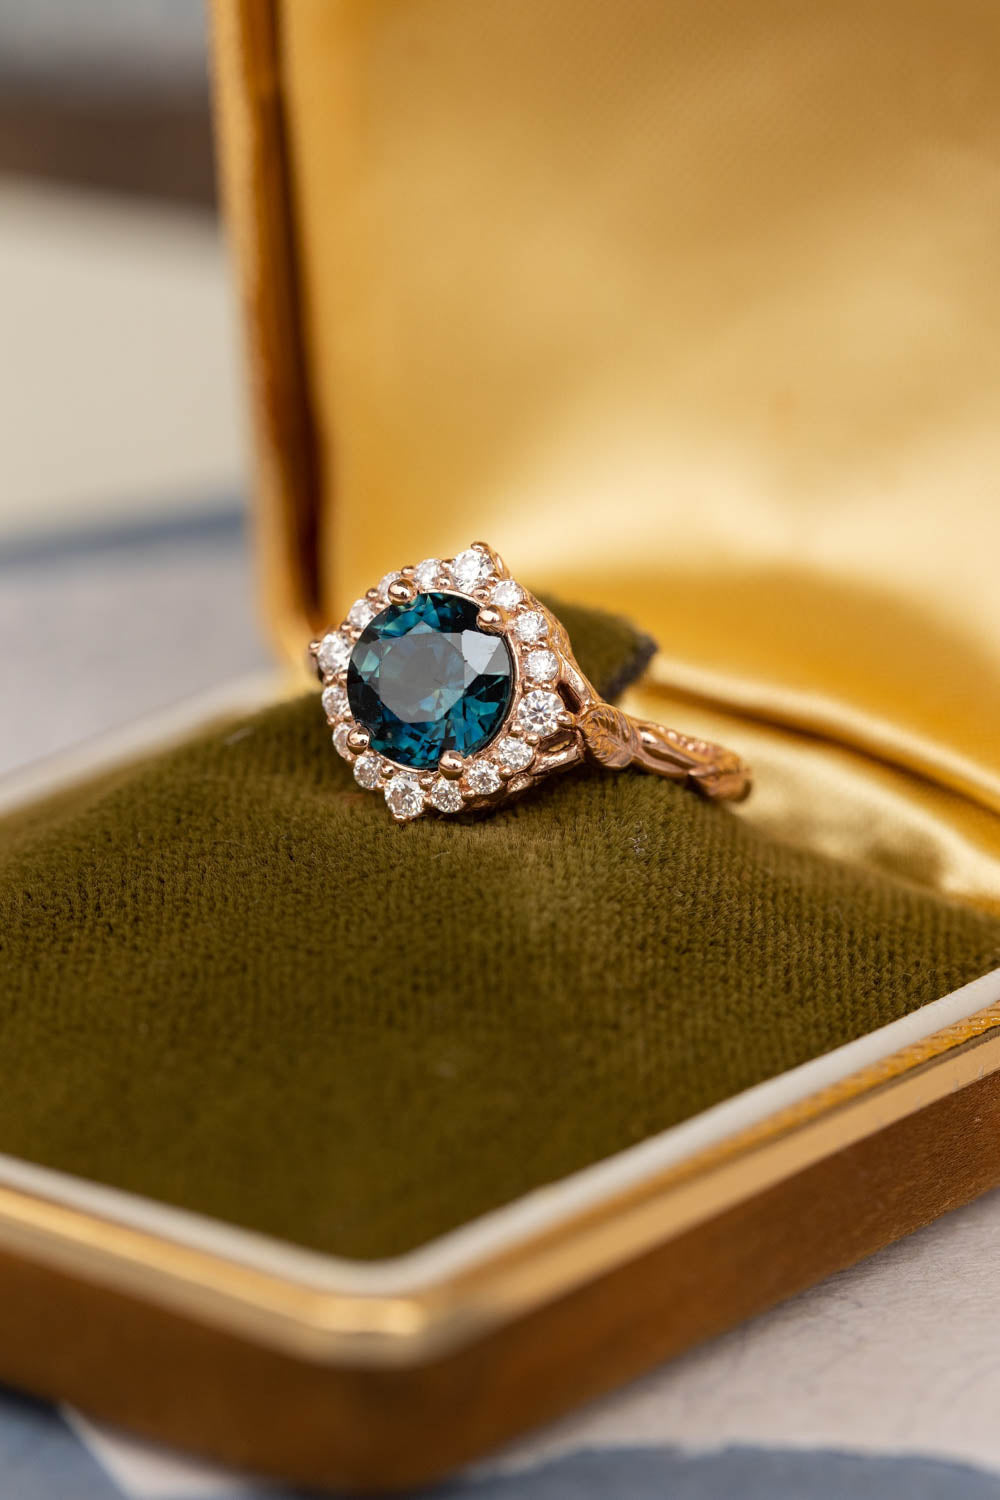 Gorgeous teal sapphire engagement ring with diamond halo, nature inspired gold ring with 2.3 carat sapphire and diamonds / Florentina - Eden Garden Jewelry™